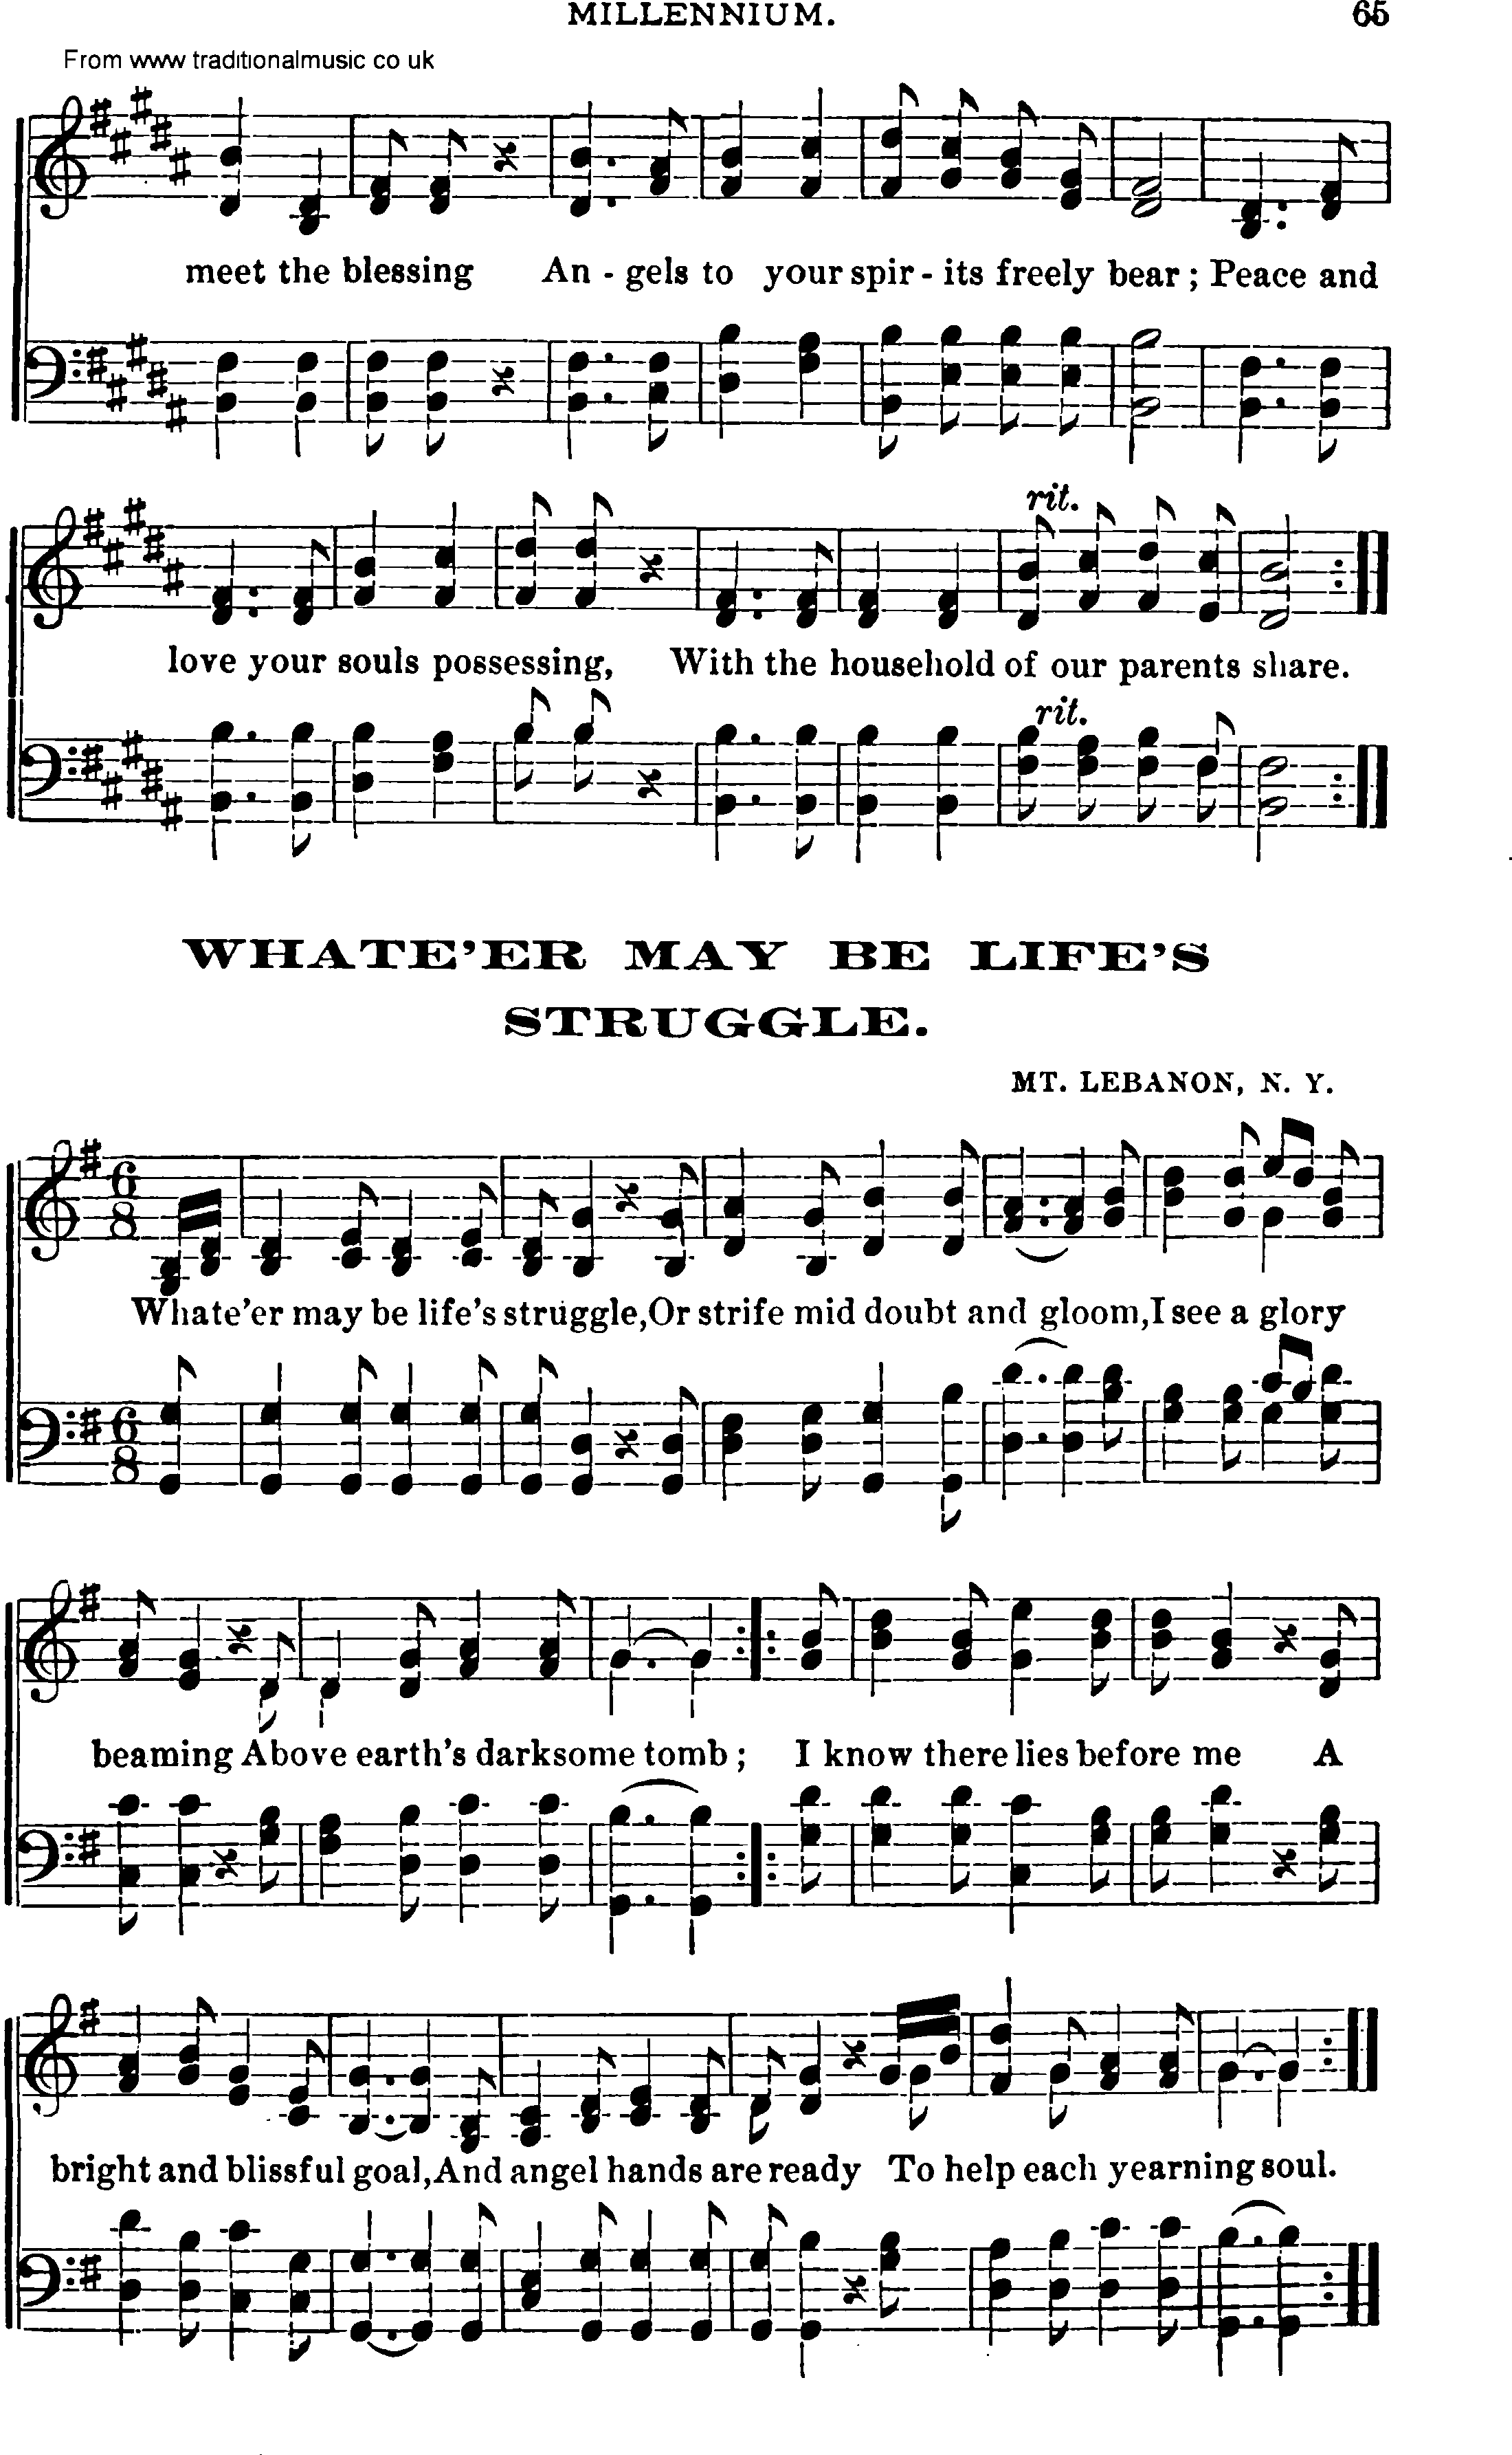 Shaker Music collection, Hymn: Whate'er May Be Life's Struggle, sheetmusic and PDF